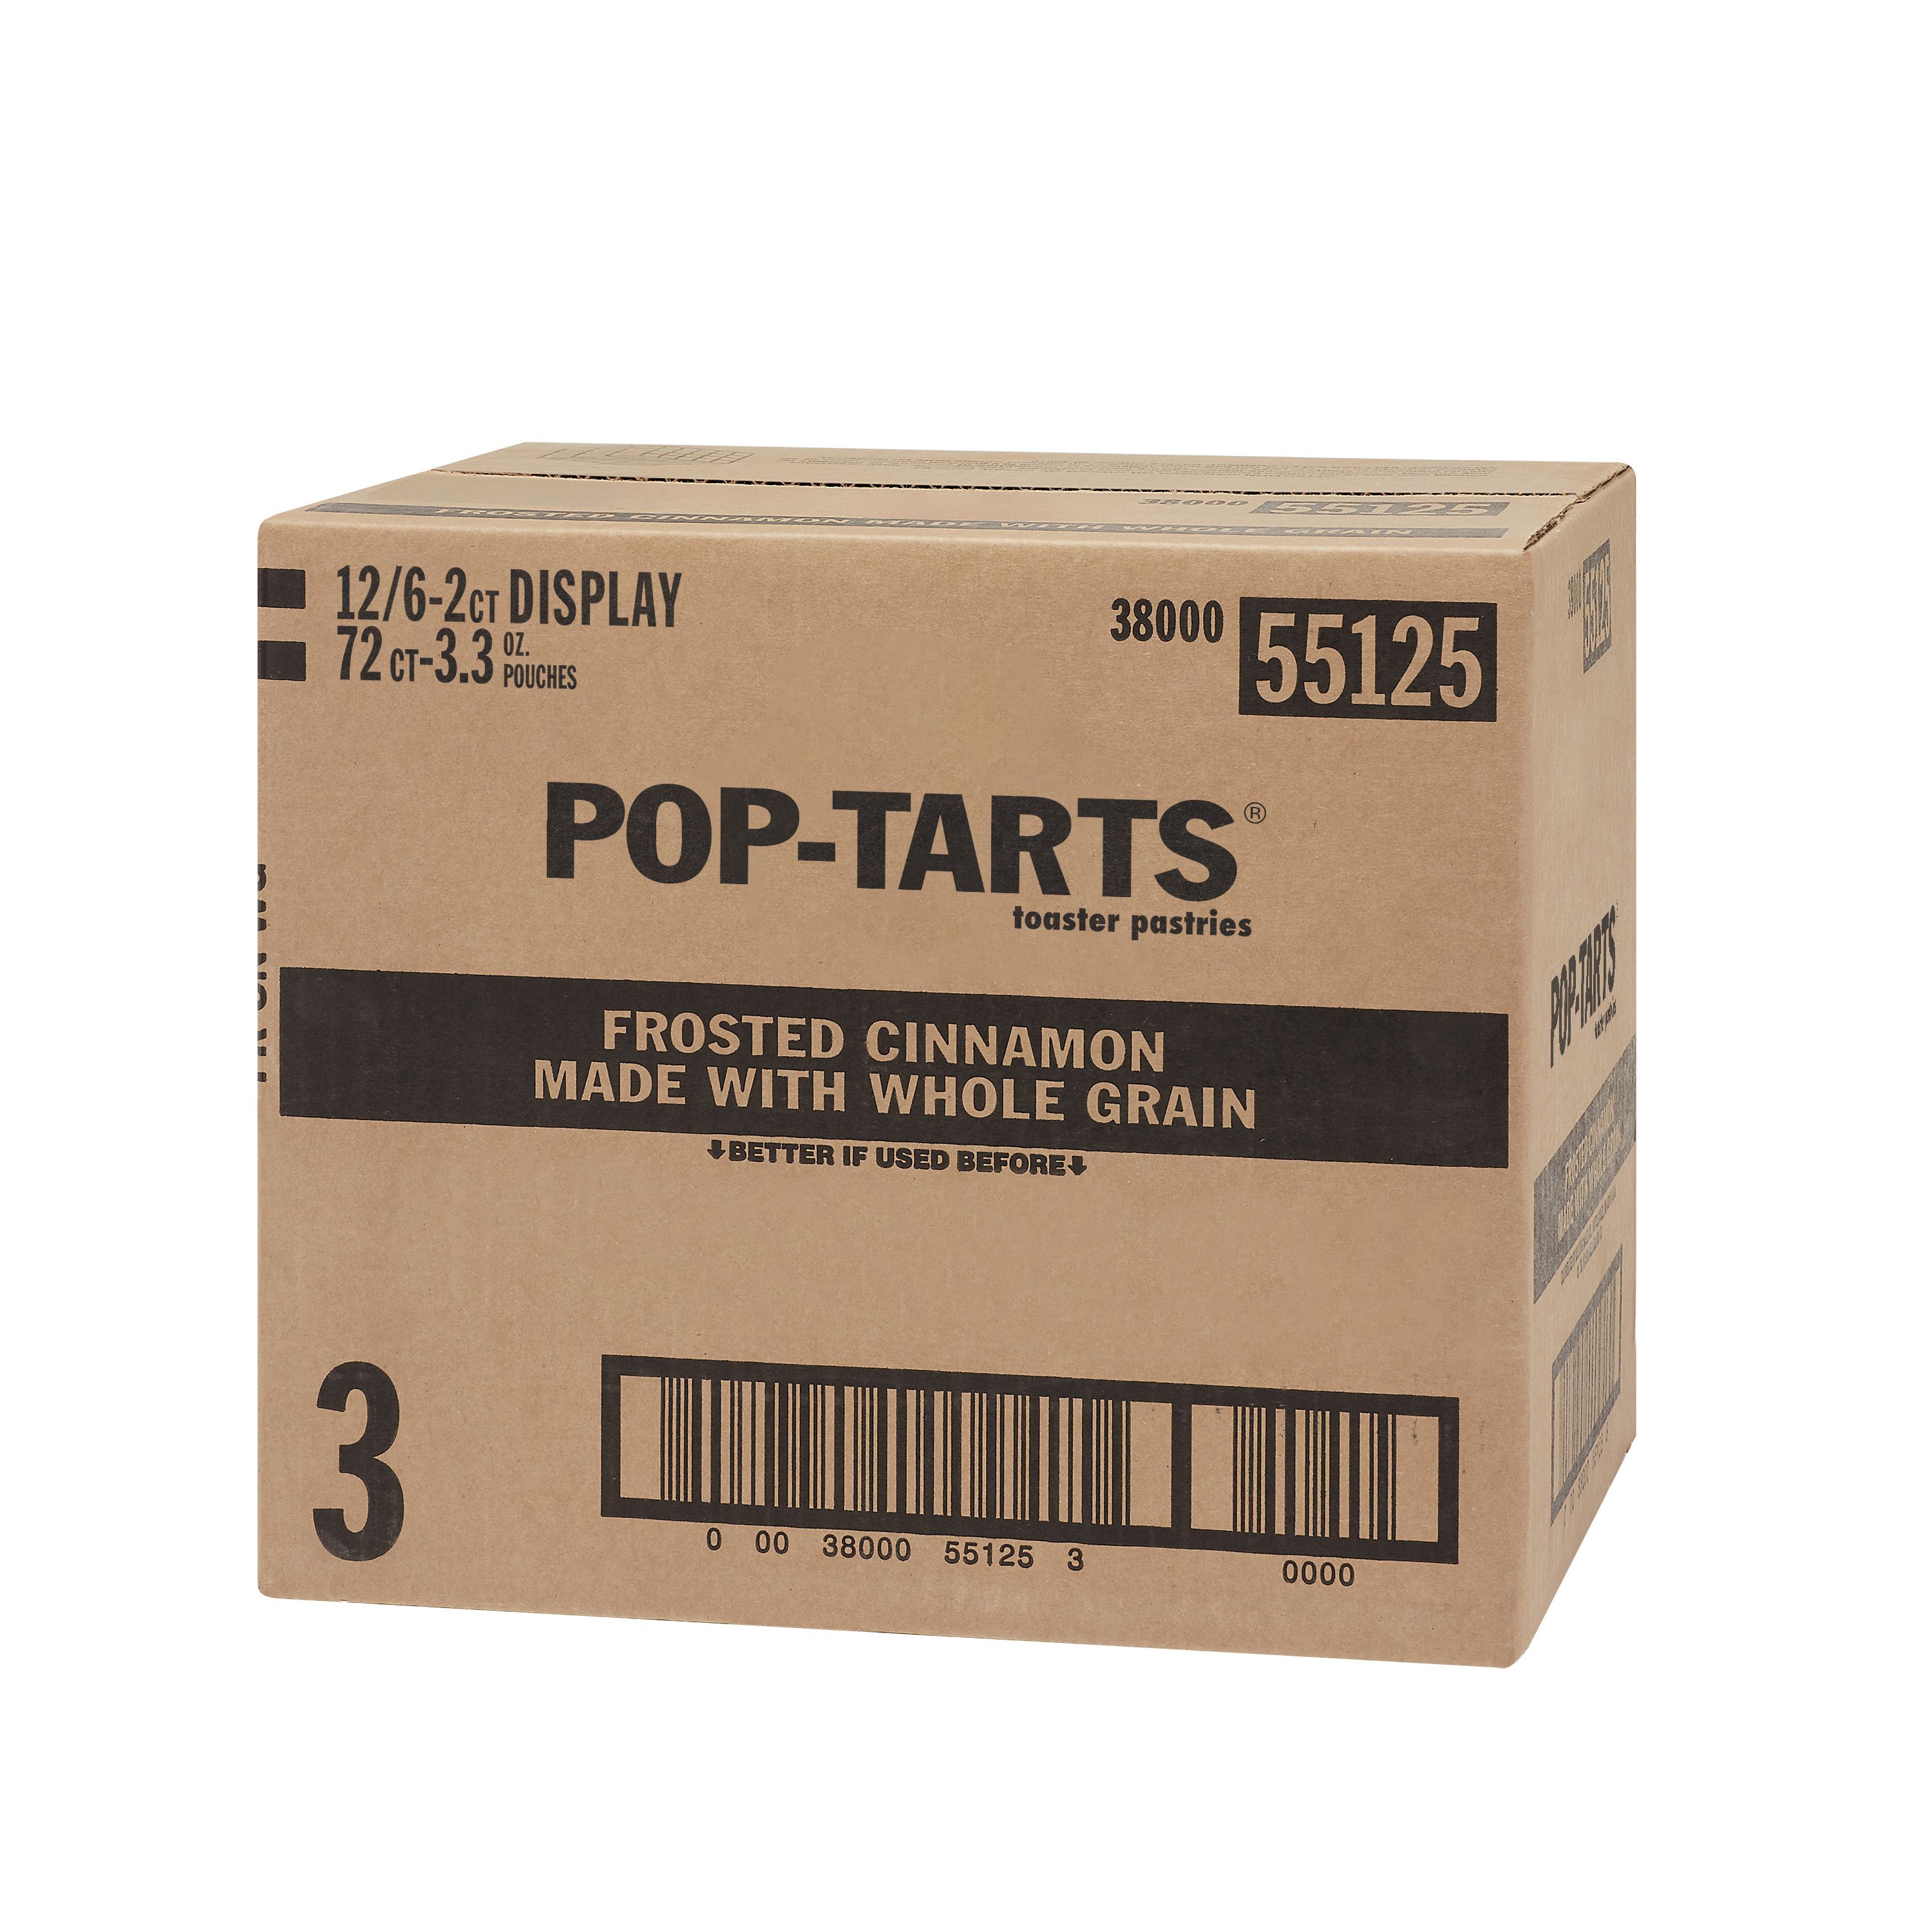 Pop-Tarts® Frosted Cinnamon Made with Whole Grain